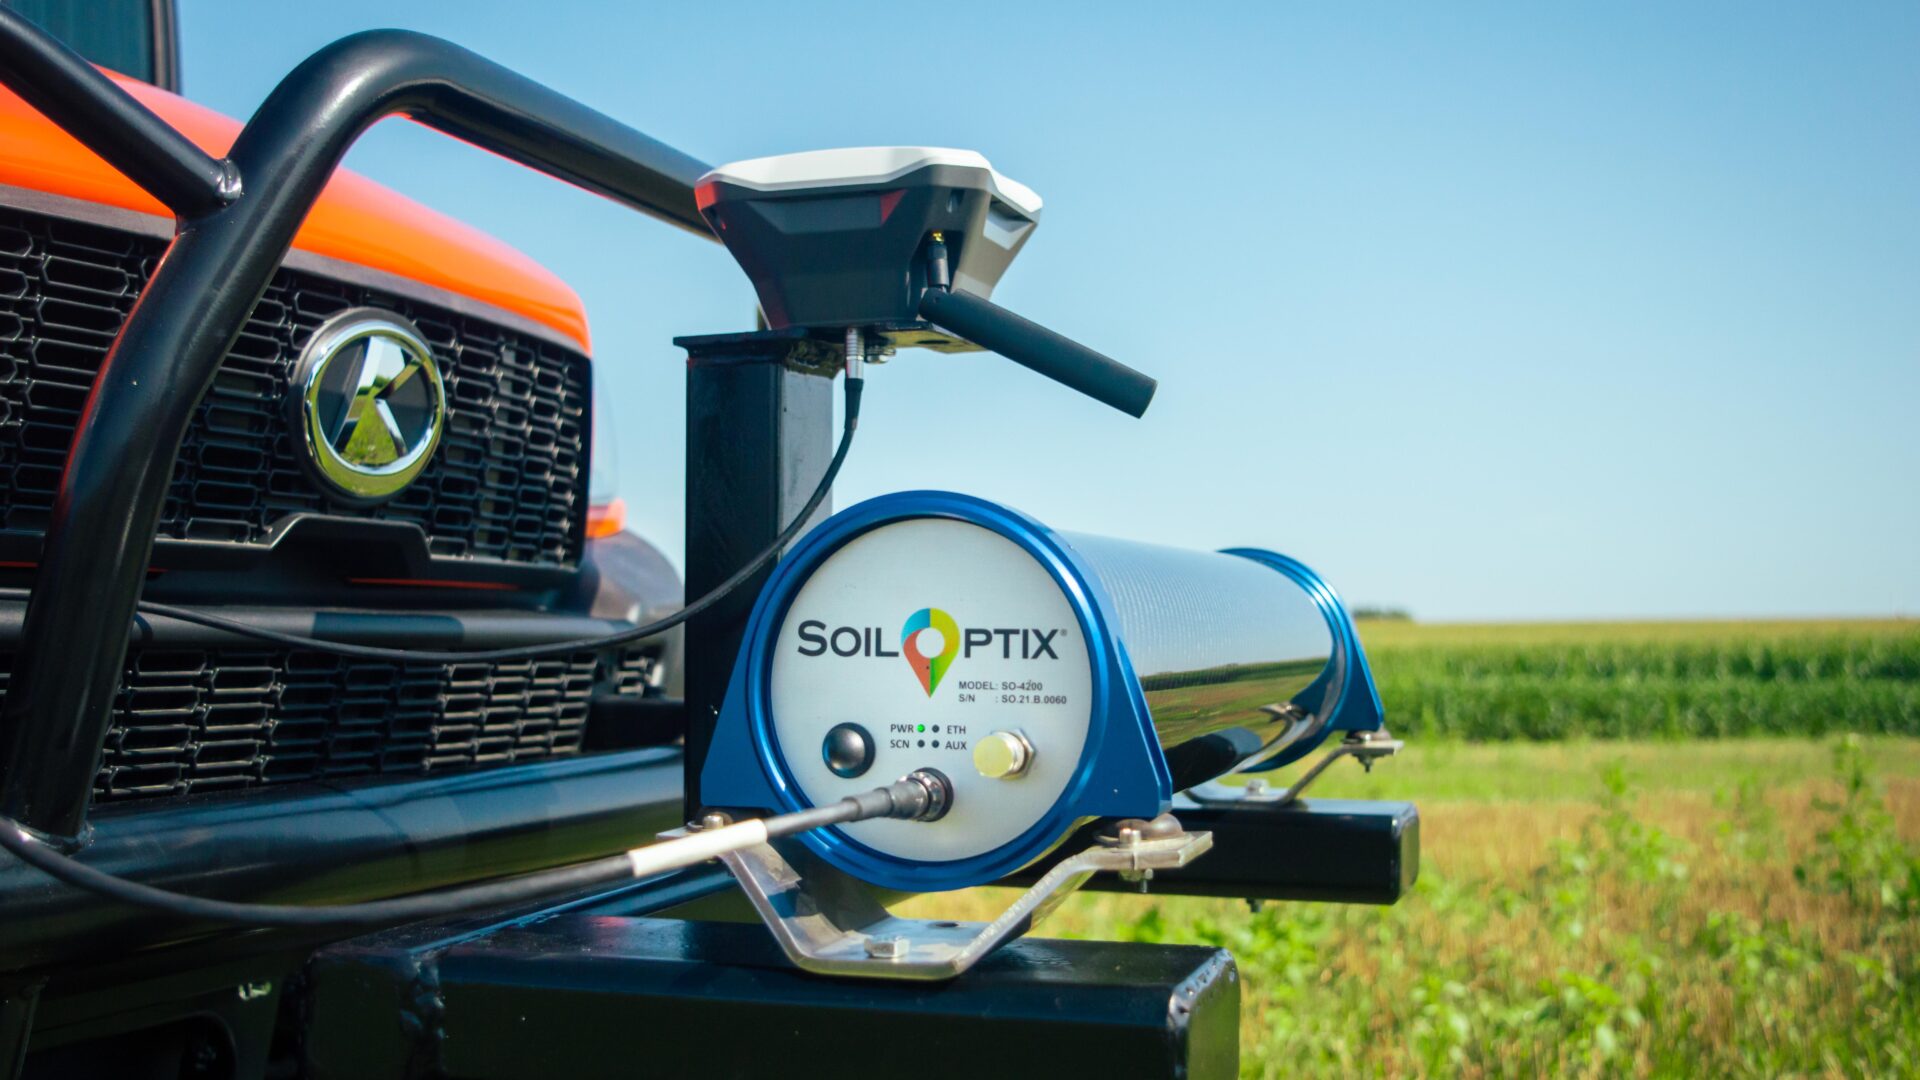 SoilOptix® sensor mounted on collection vehicle in field.